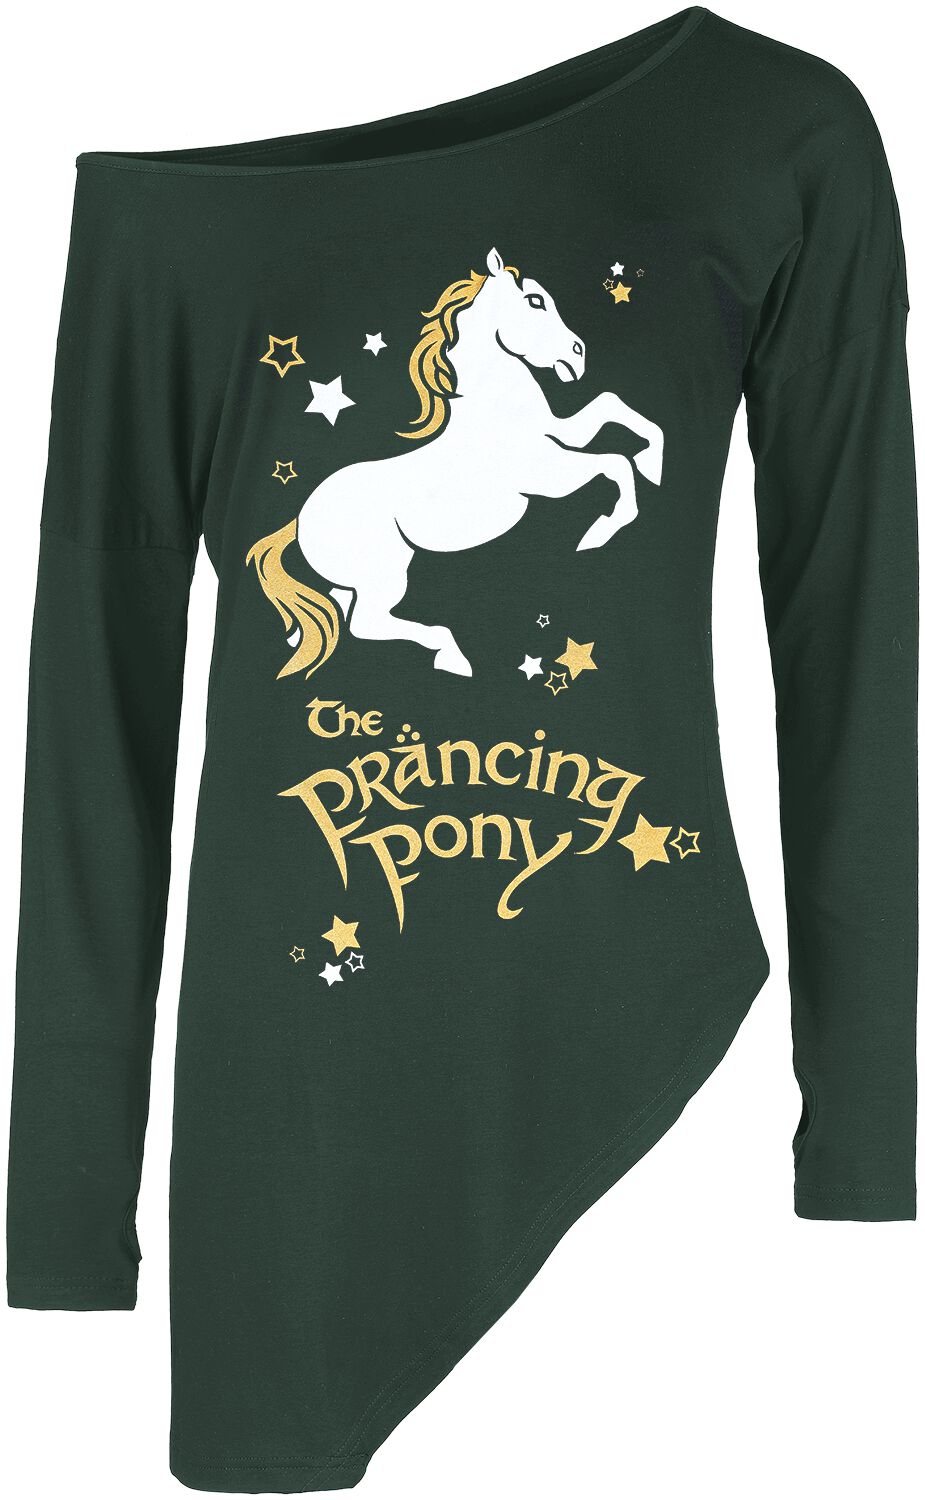 The Lord Of The Rings Prancing Pony Long-sleeve Shirt green